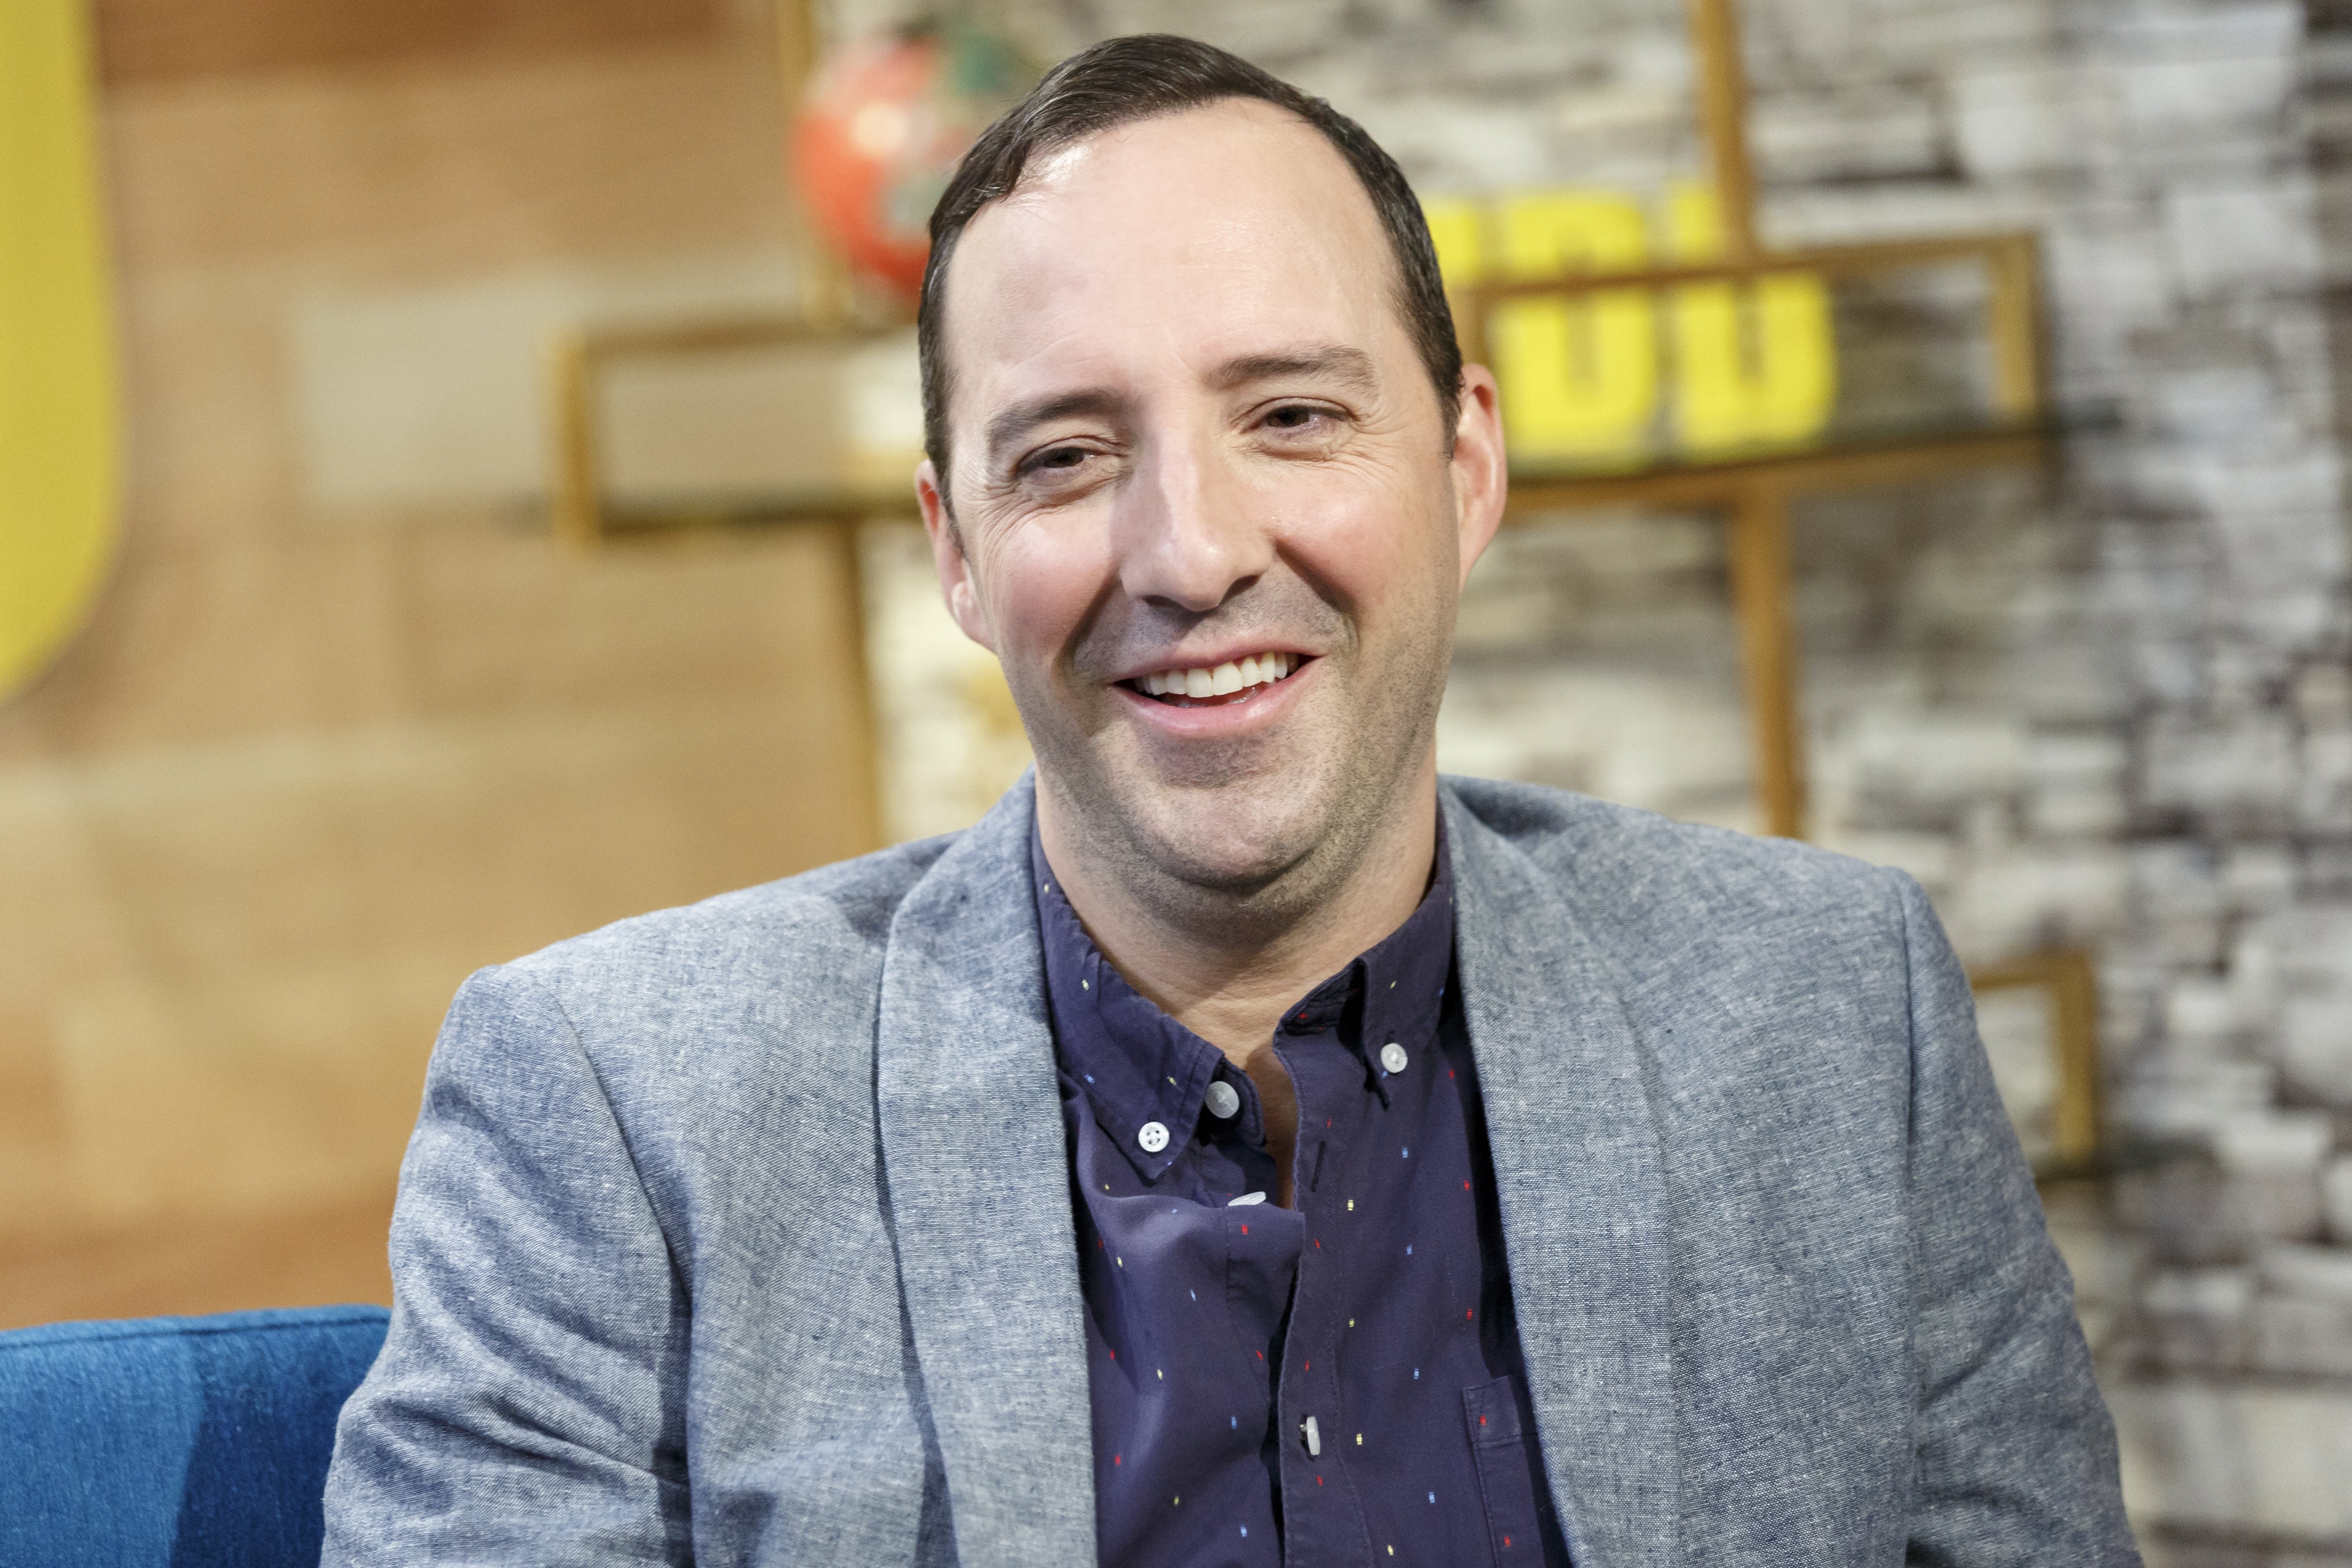 Tony Hale on May 15, 2018 in Studio City, California | Source: Getty Images 